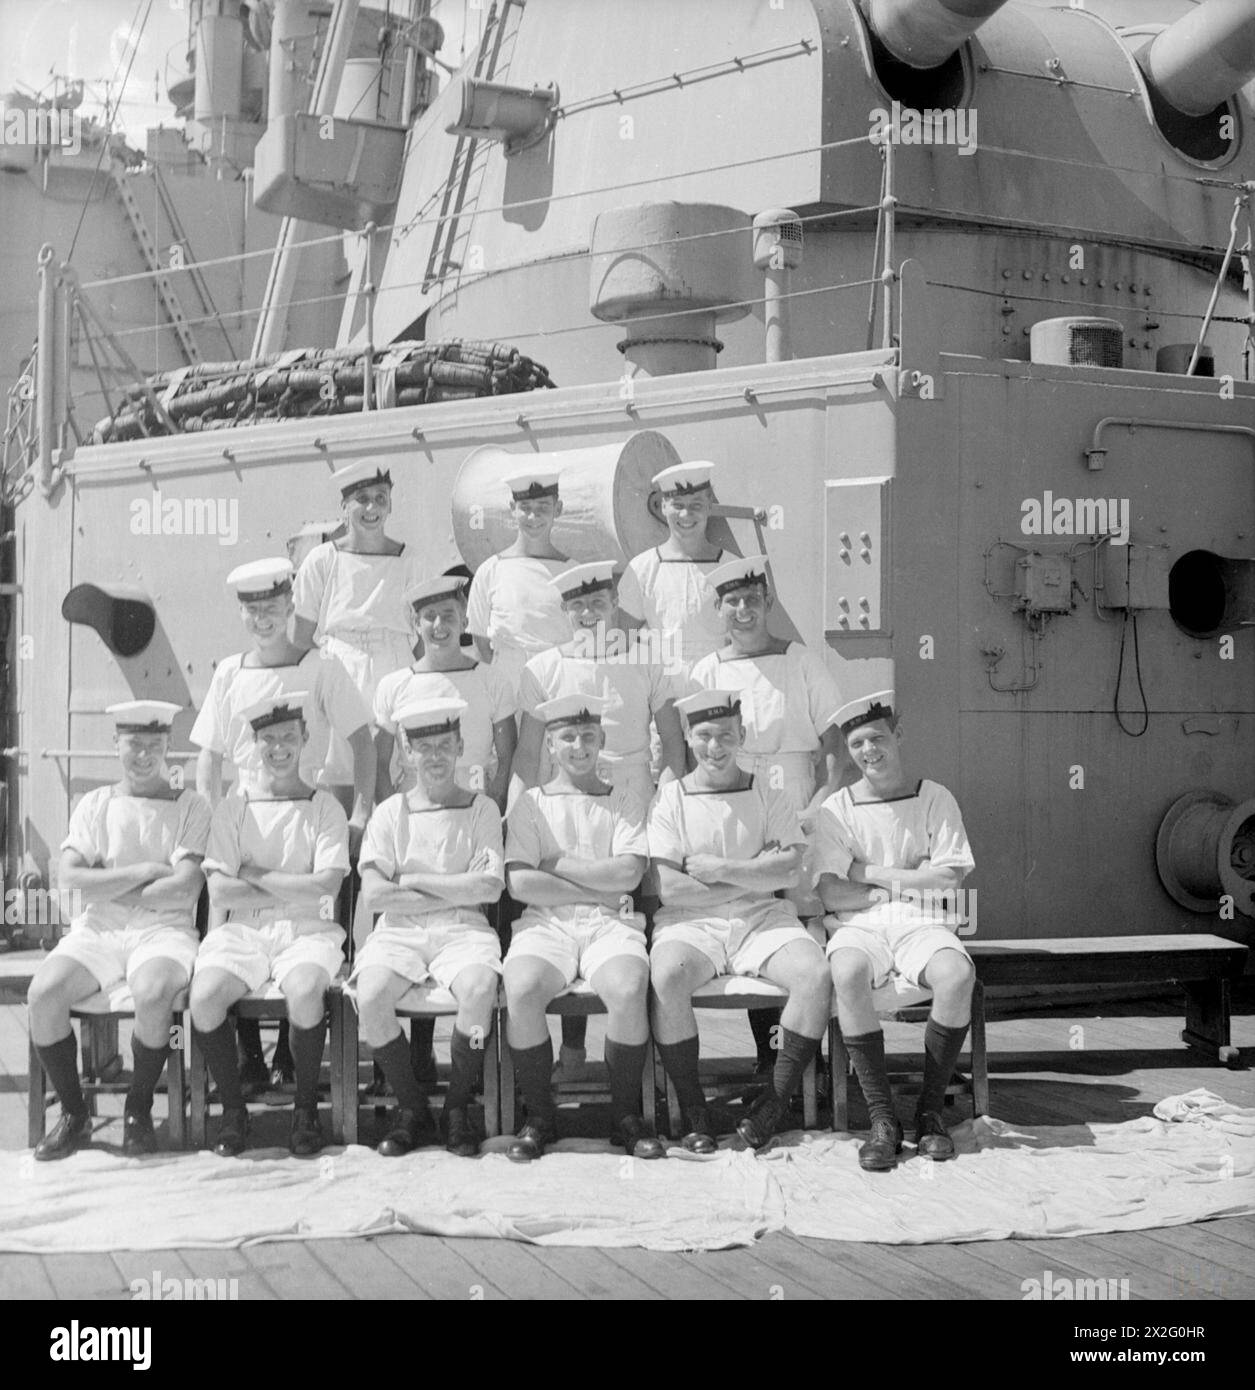 MEN OF THE HMS SUFFOLK, A CRUISER SERVING WITH ADMIRAL JAMES SOMERVILLE'S EASTERN FLEET. 12 DECEMBER 1943, TRINCOMALEE. THE MEN ARE DIVIDED INTO GROUPS BY TOWN AND/OR DISTRICT. - East London group. Front row, left to right: AB C Brown; AB R Sidwell; Stoker W West; AB E Chamberlain; AB C Purton; L/Sea T McNally. Second row, left to right; AB E Challenger; AB W Tatman; AB F Stemp; AB S Tuff. Third row, left to right: AB A Meddings; O/Sea L Howard; AB W Legg Stock Photo